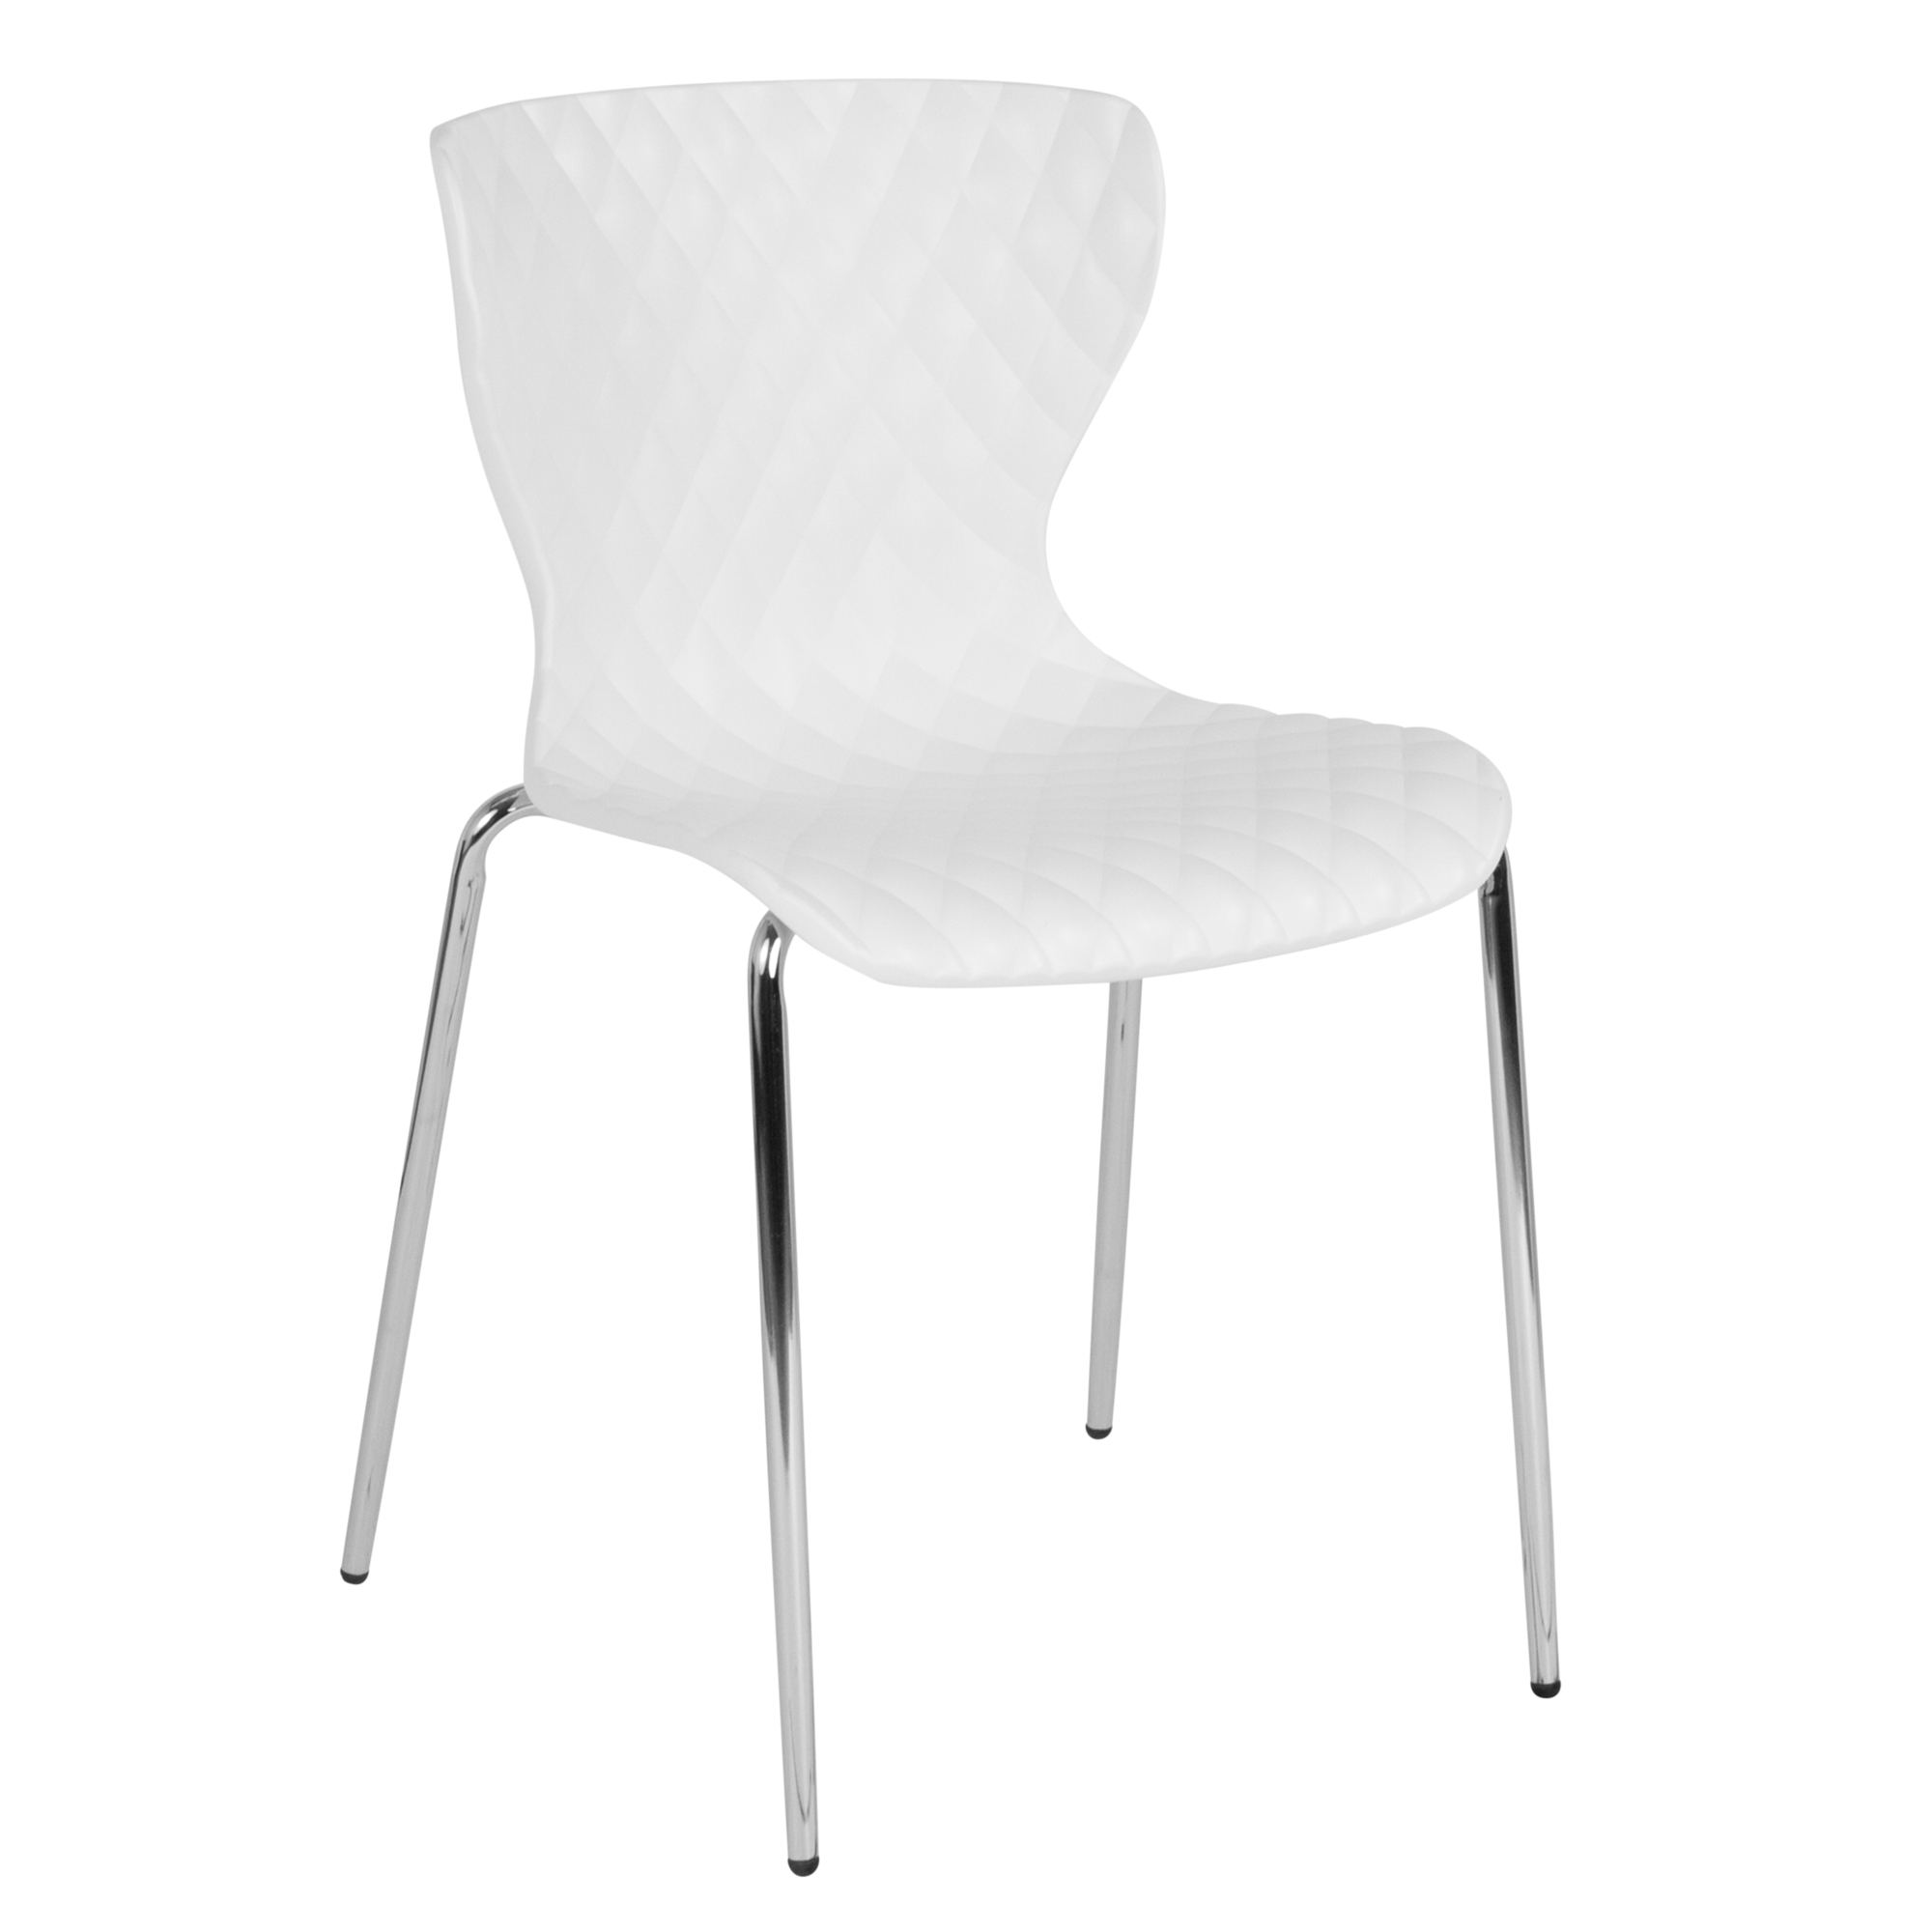 Flash Furniture, Contemporary White Plastic Stack Chair, Primary Color White, Included (qty.) 1, Model LF707CWH